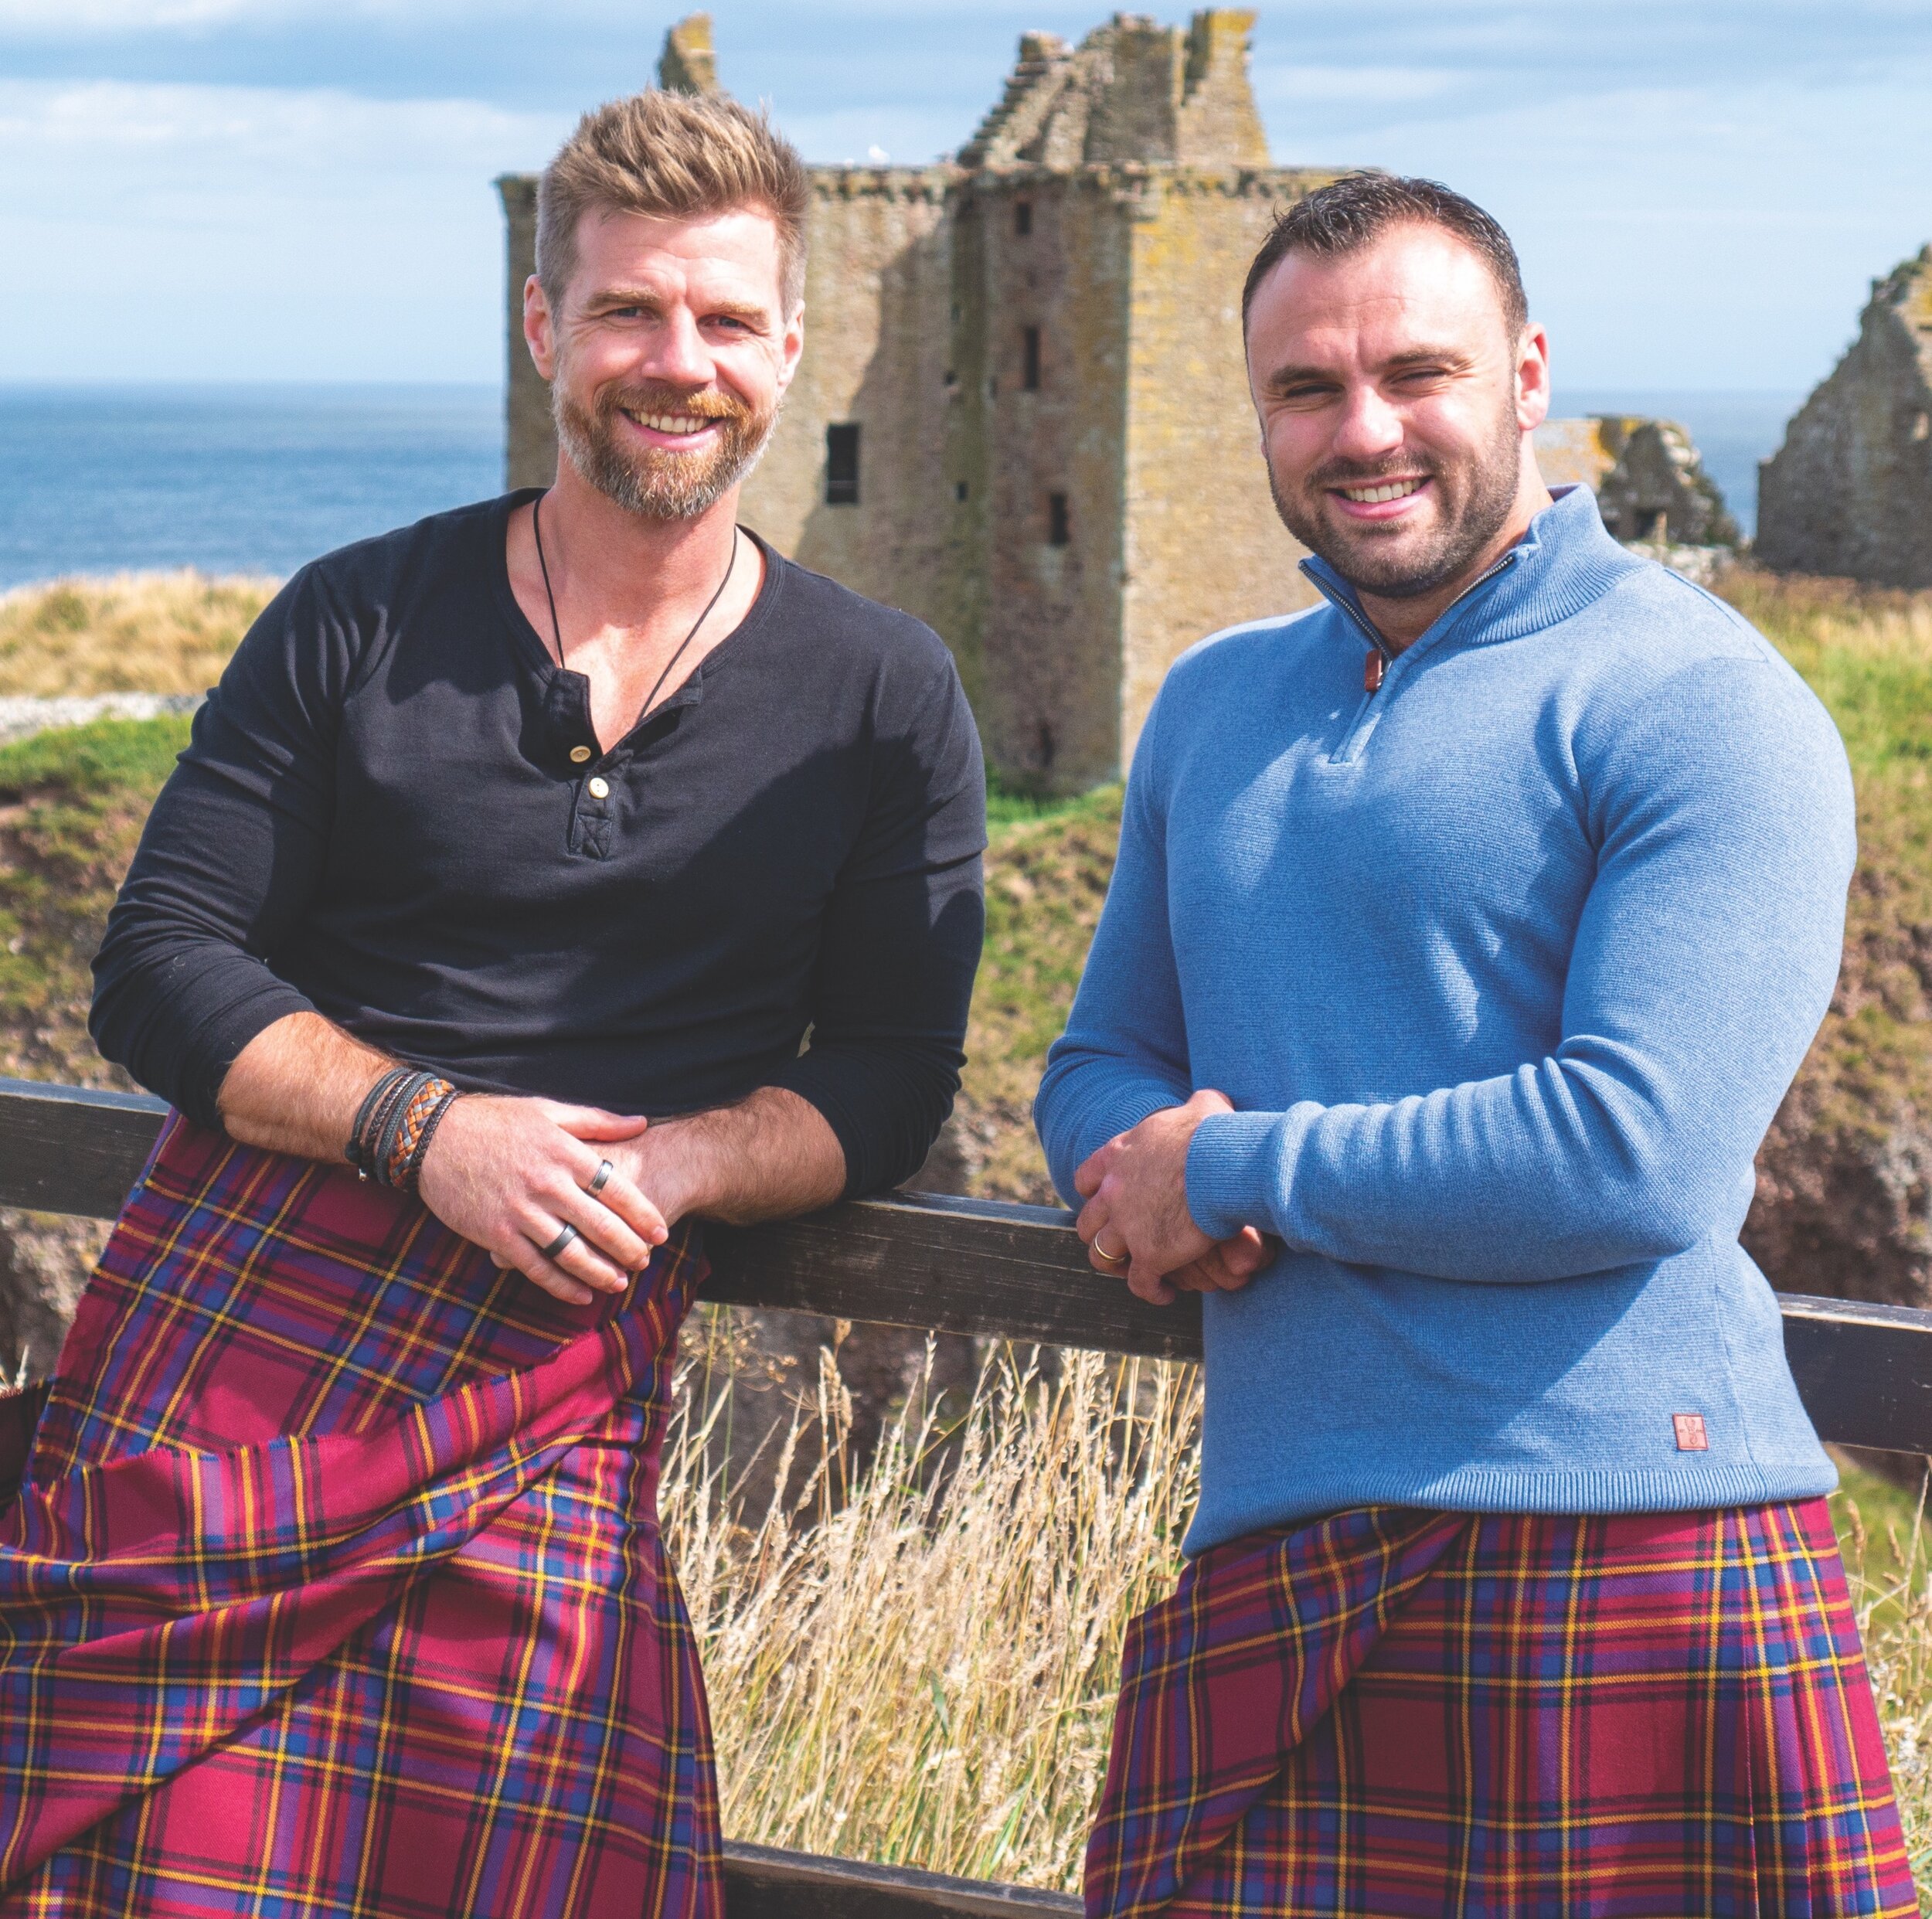 The Kilted Coaches